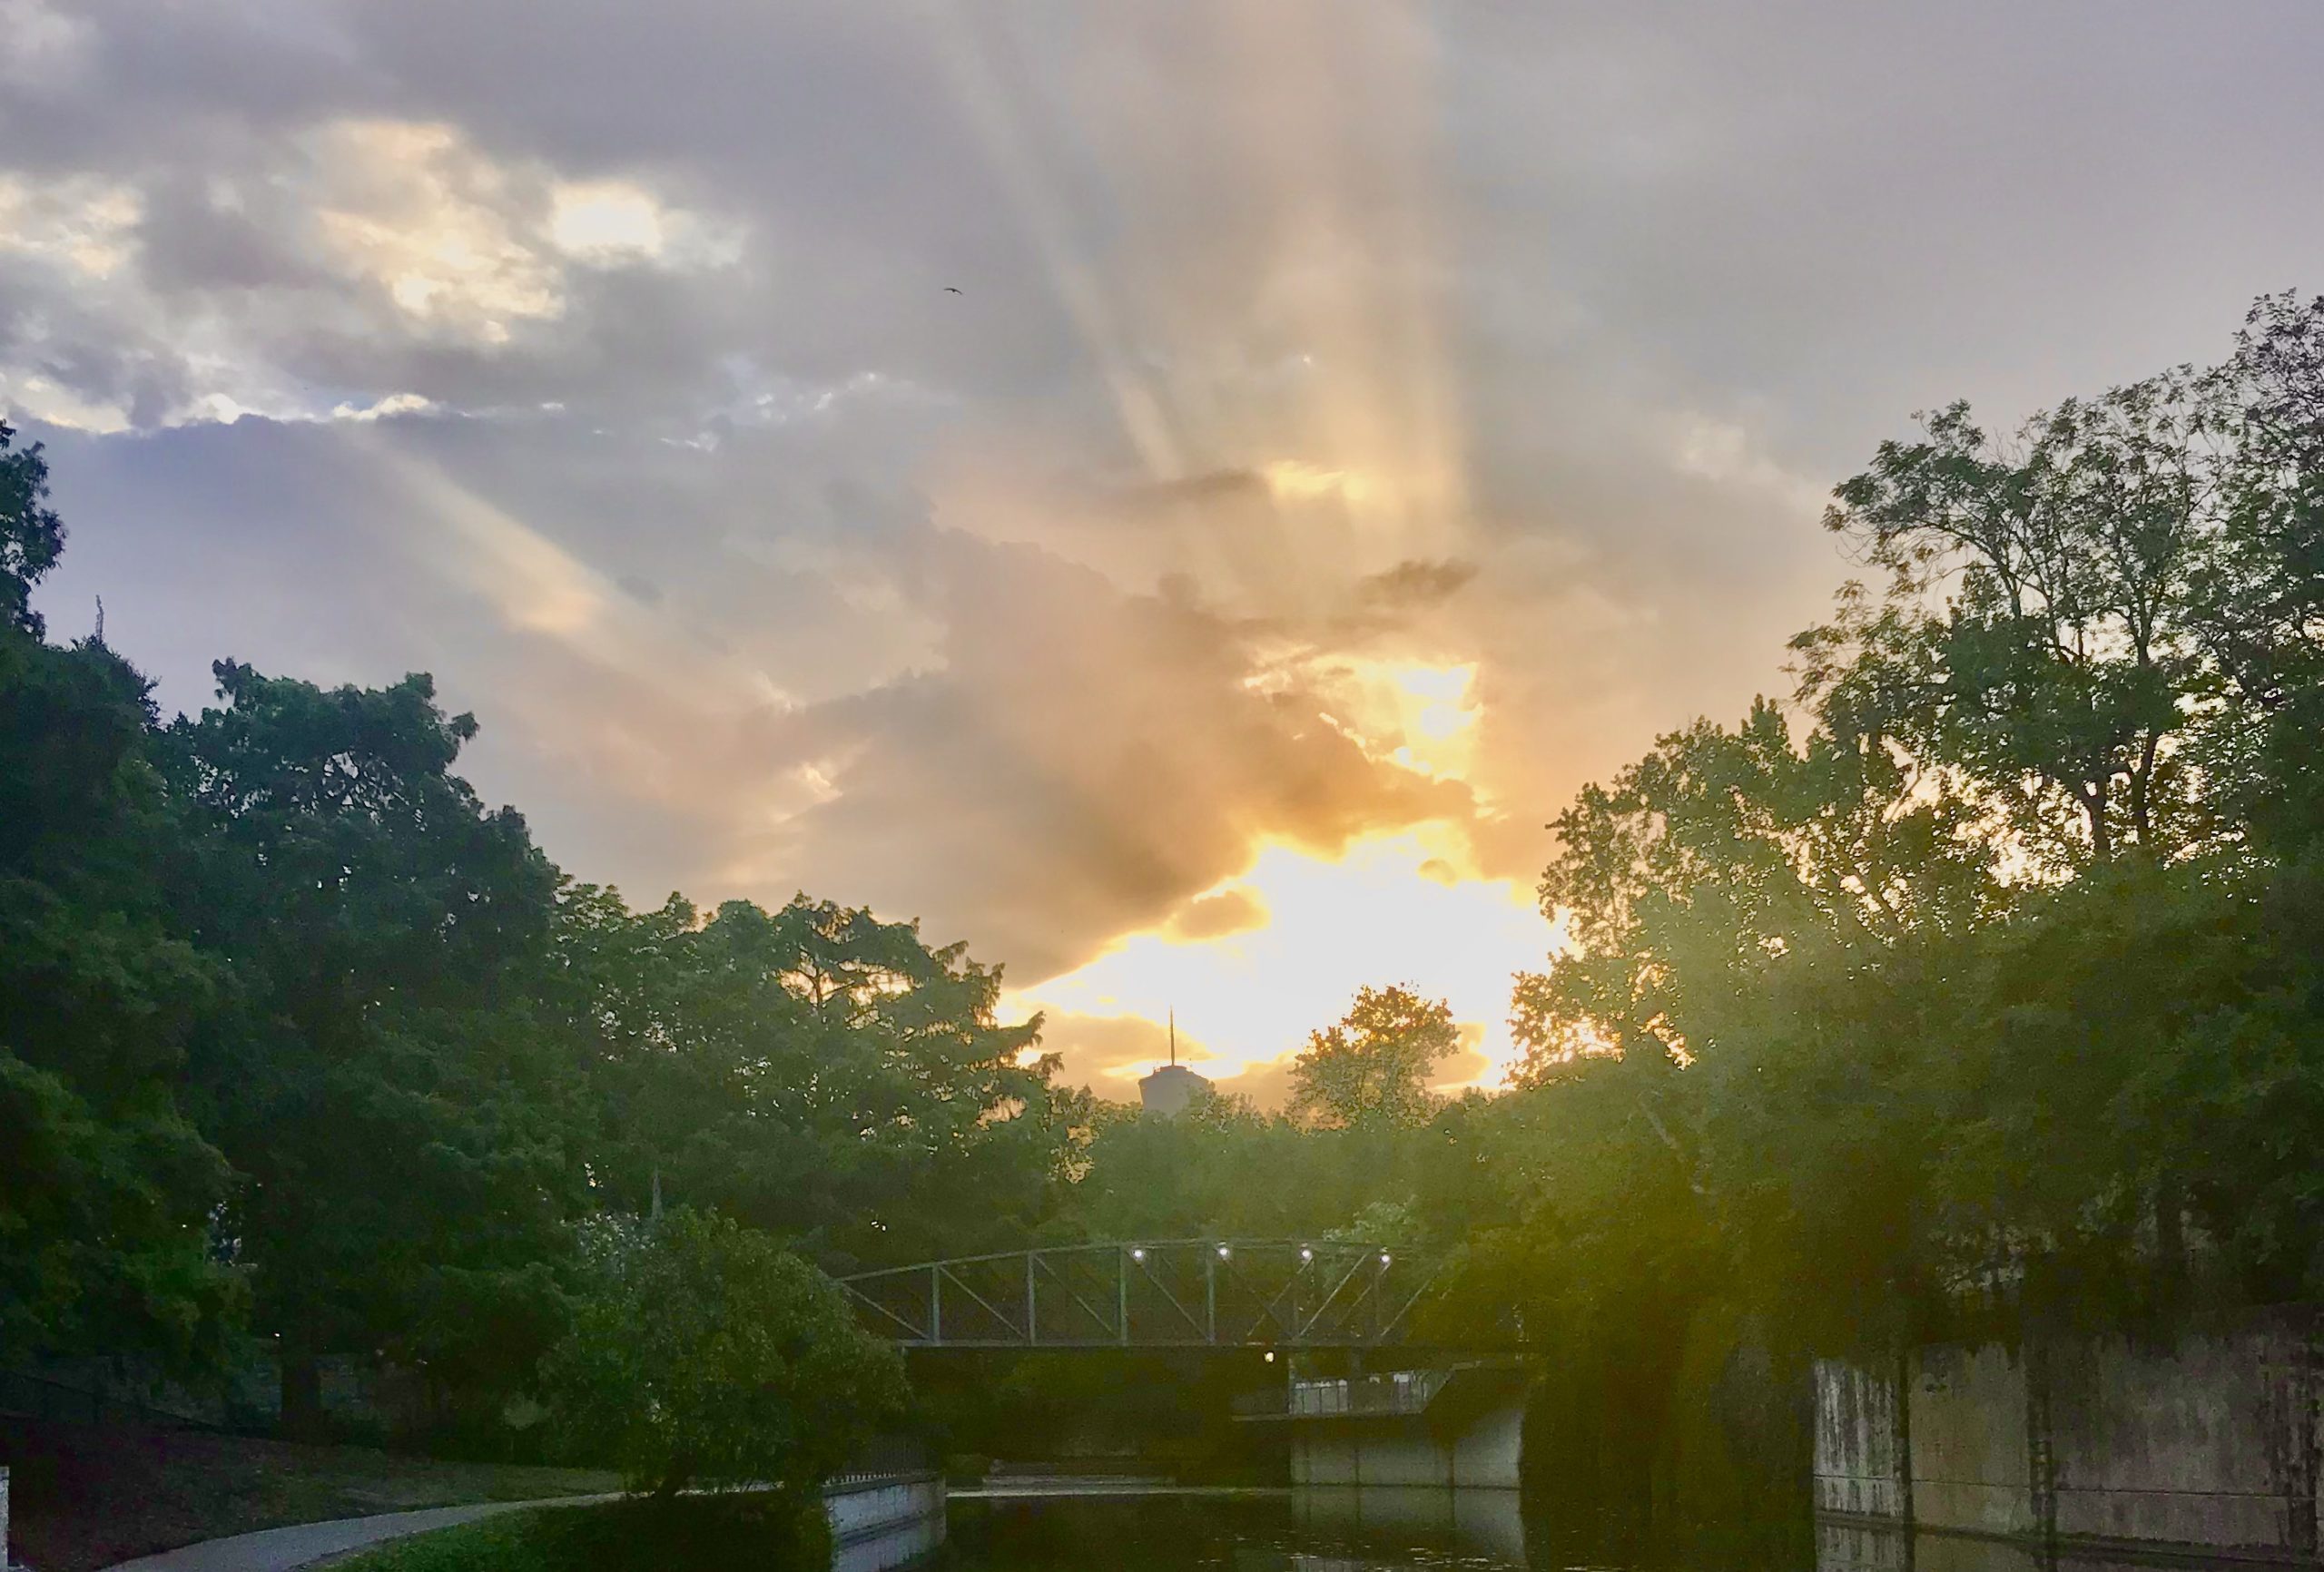 hero image of sunset bursting with rays over a green treeline, with the san antonio river in foreground.